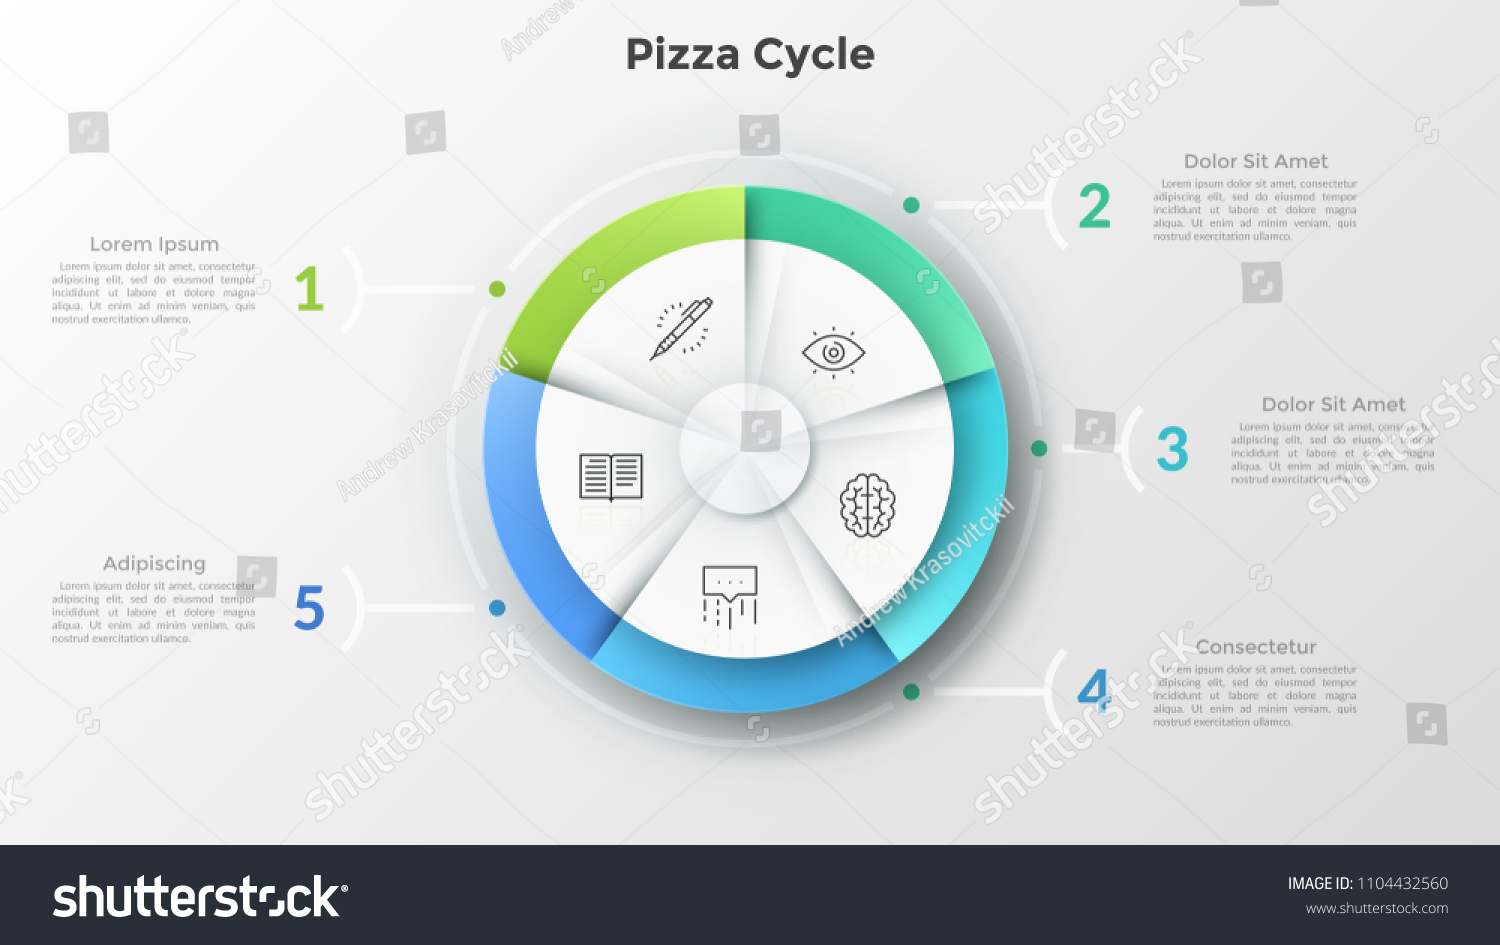 stock-vector-round-pizza-chart-divided-into-equal-sectors-with-linear-symbols-inside-connected-to-numbered-1104432560.jpg